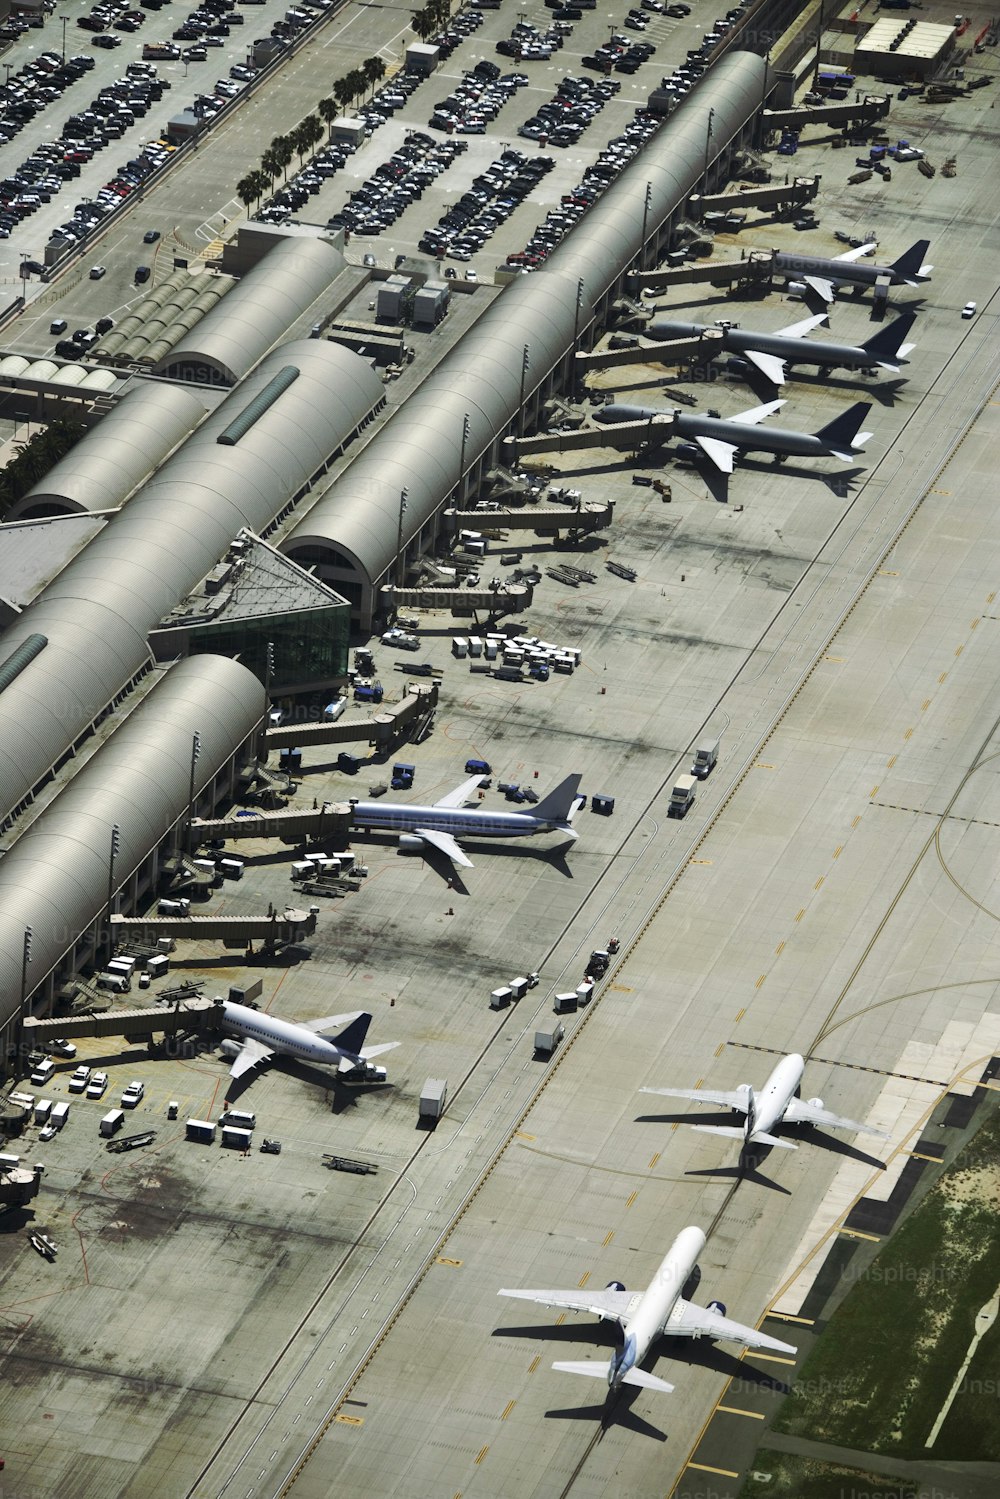 an aerial view of an airport filled with airplanes